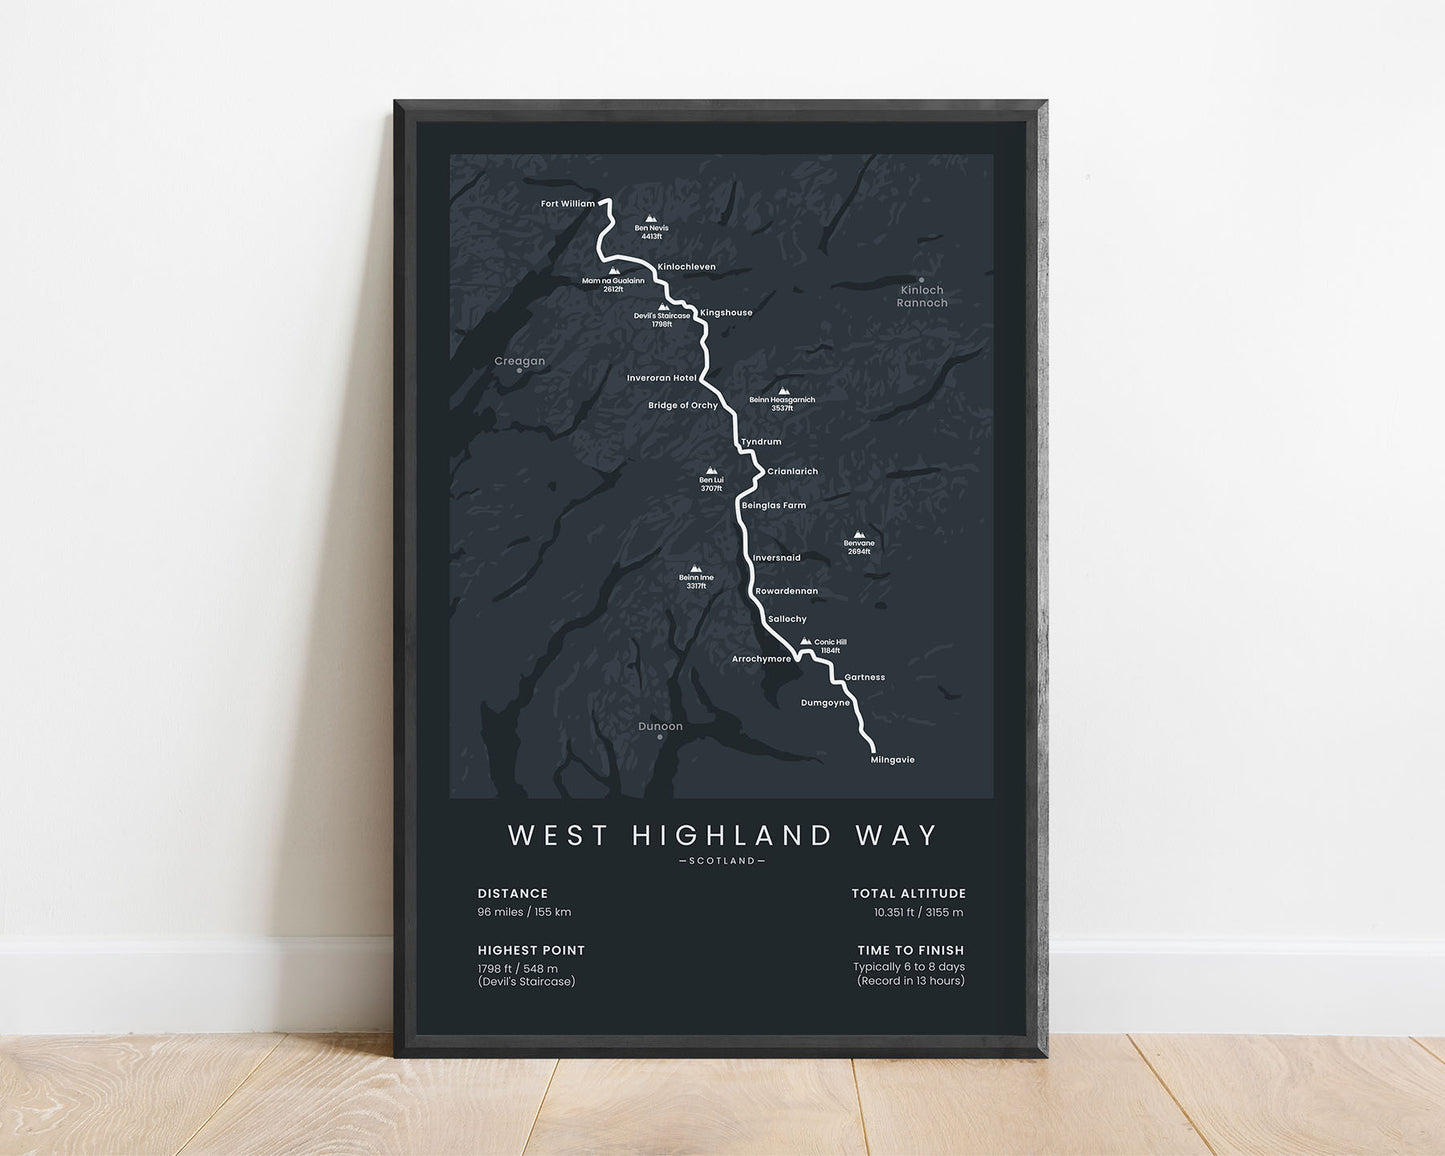 West Highland Way (Milngavie to Fort William) long-distance trekking path poster with black background